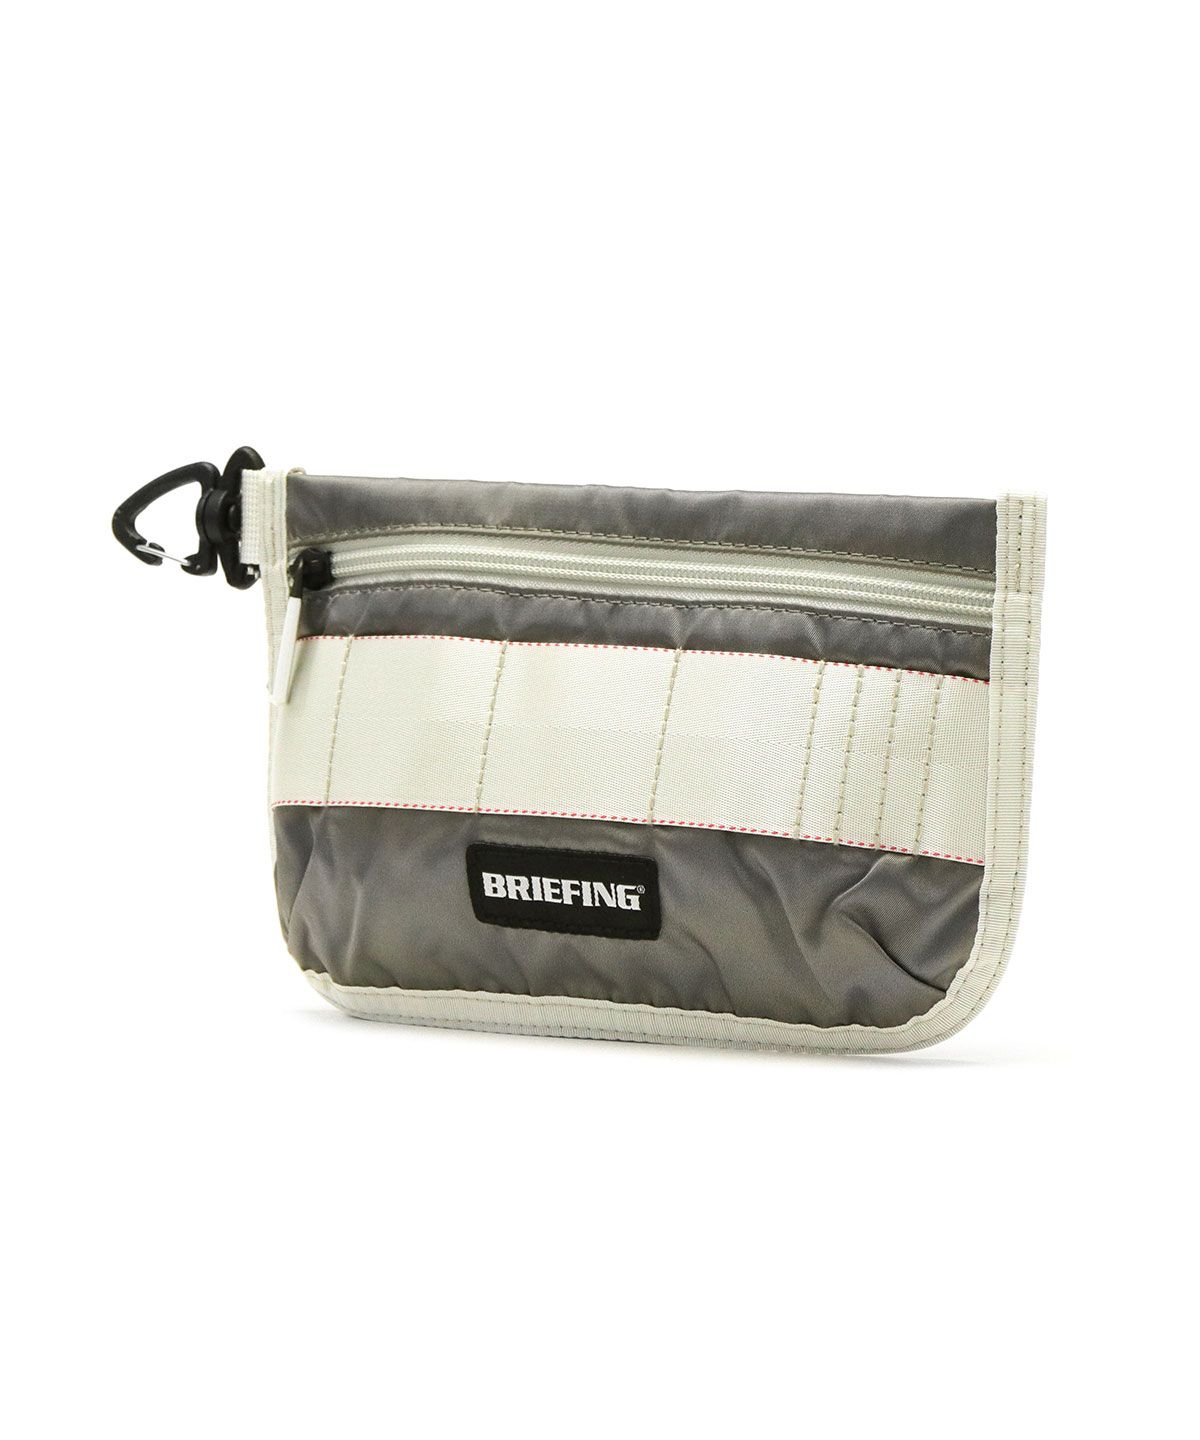 BRIEFING POUCH ブリーフィング　ポーチ グレージュ　新品